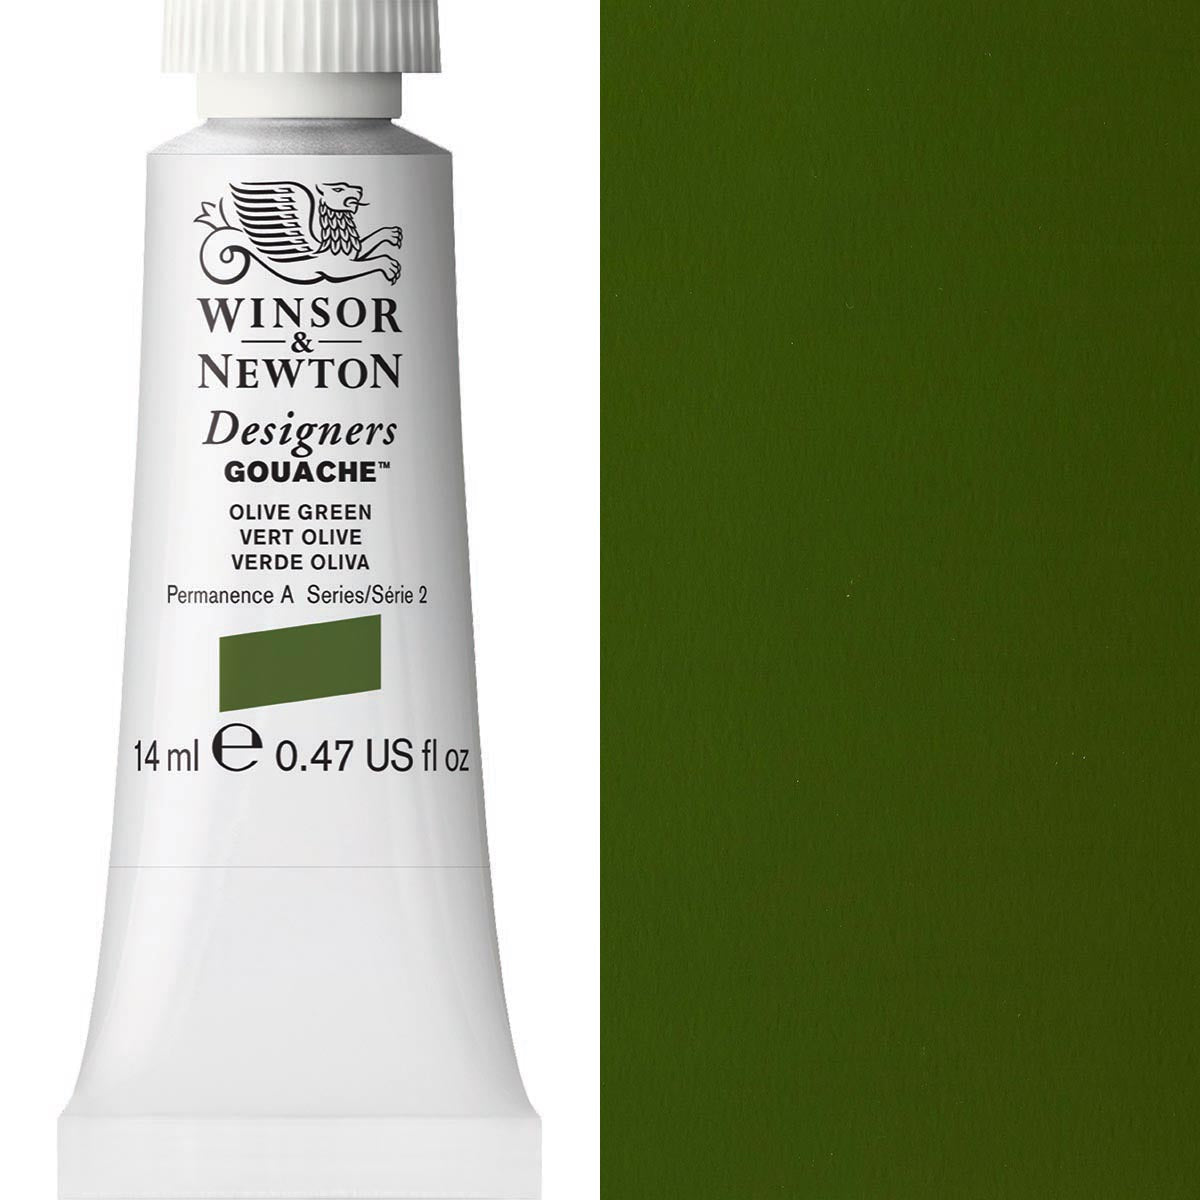 Winsor and Newton - Designers Gouache - 14ml - Olive Green